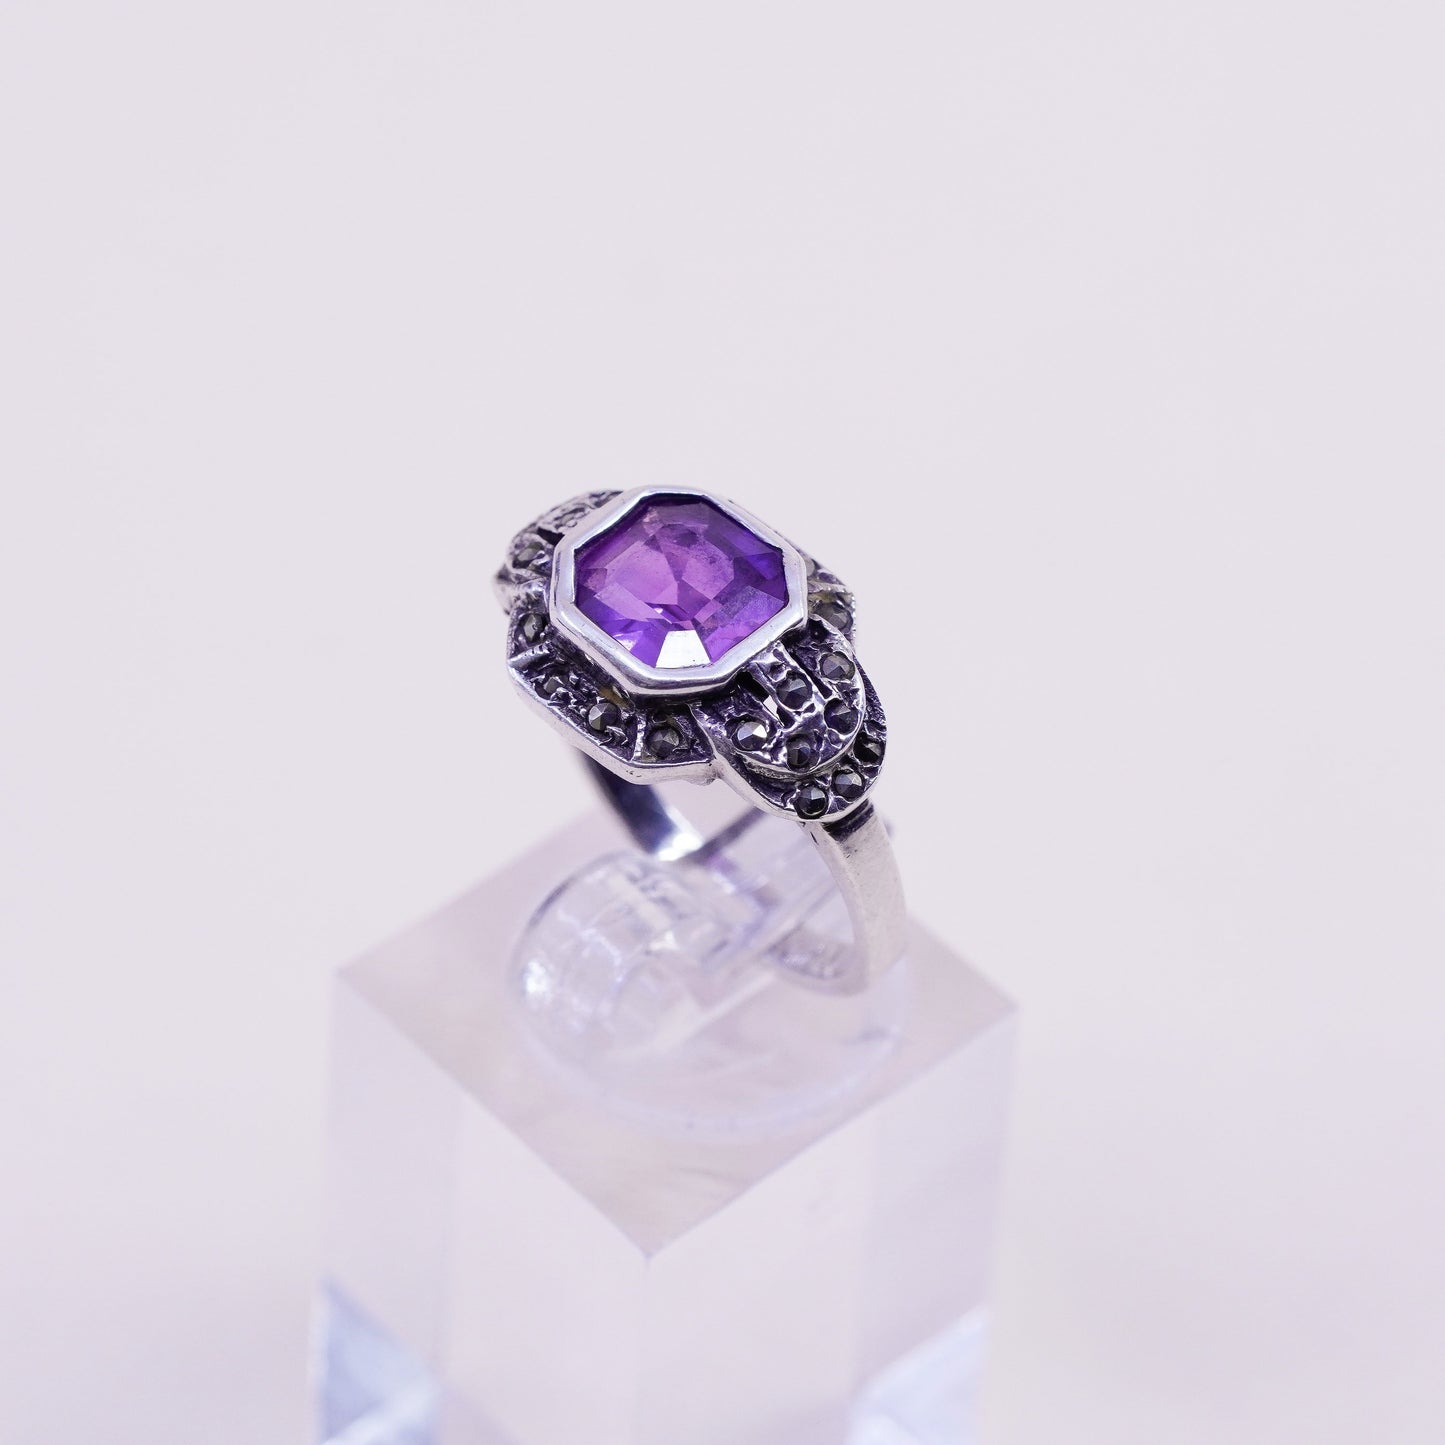 Size 6.25, Vintage sterling 925 silver handmade ring with amethyst marcasite